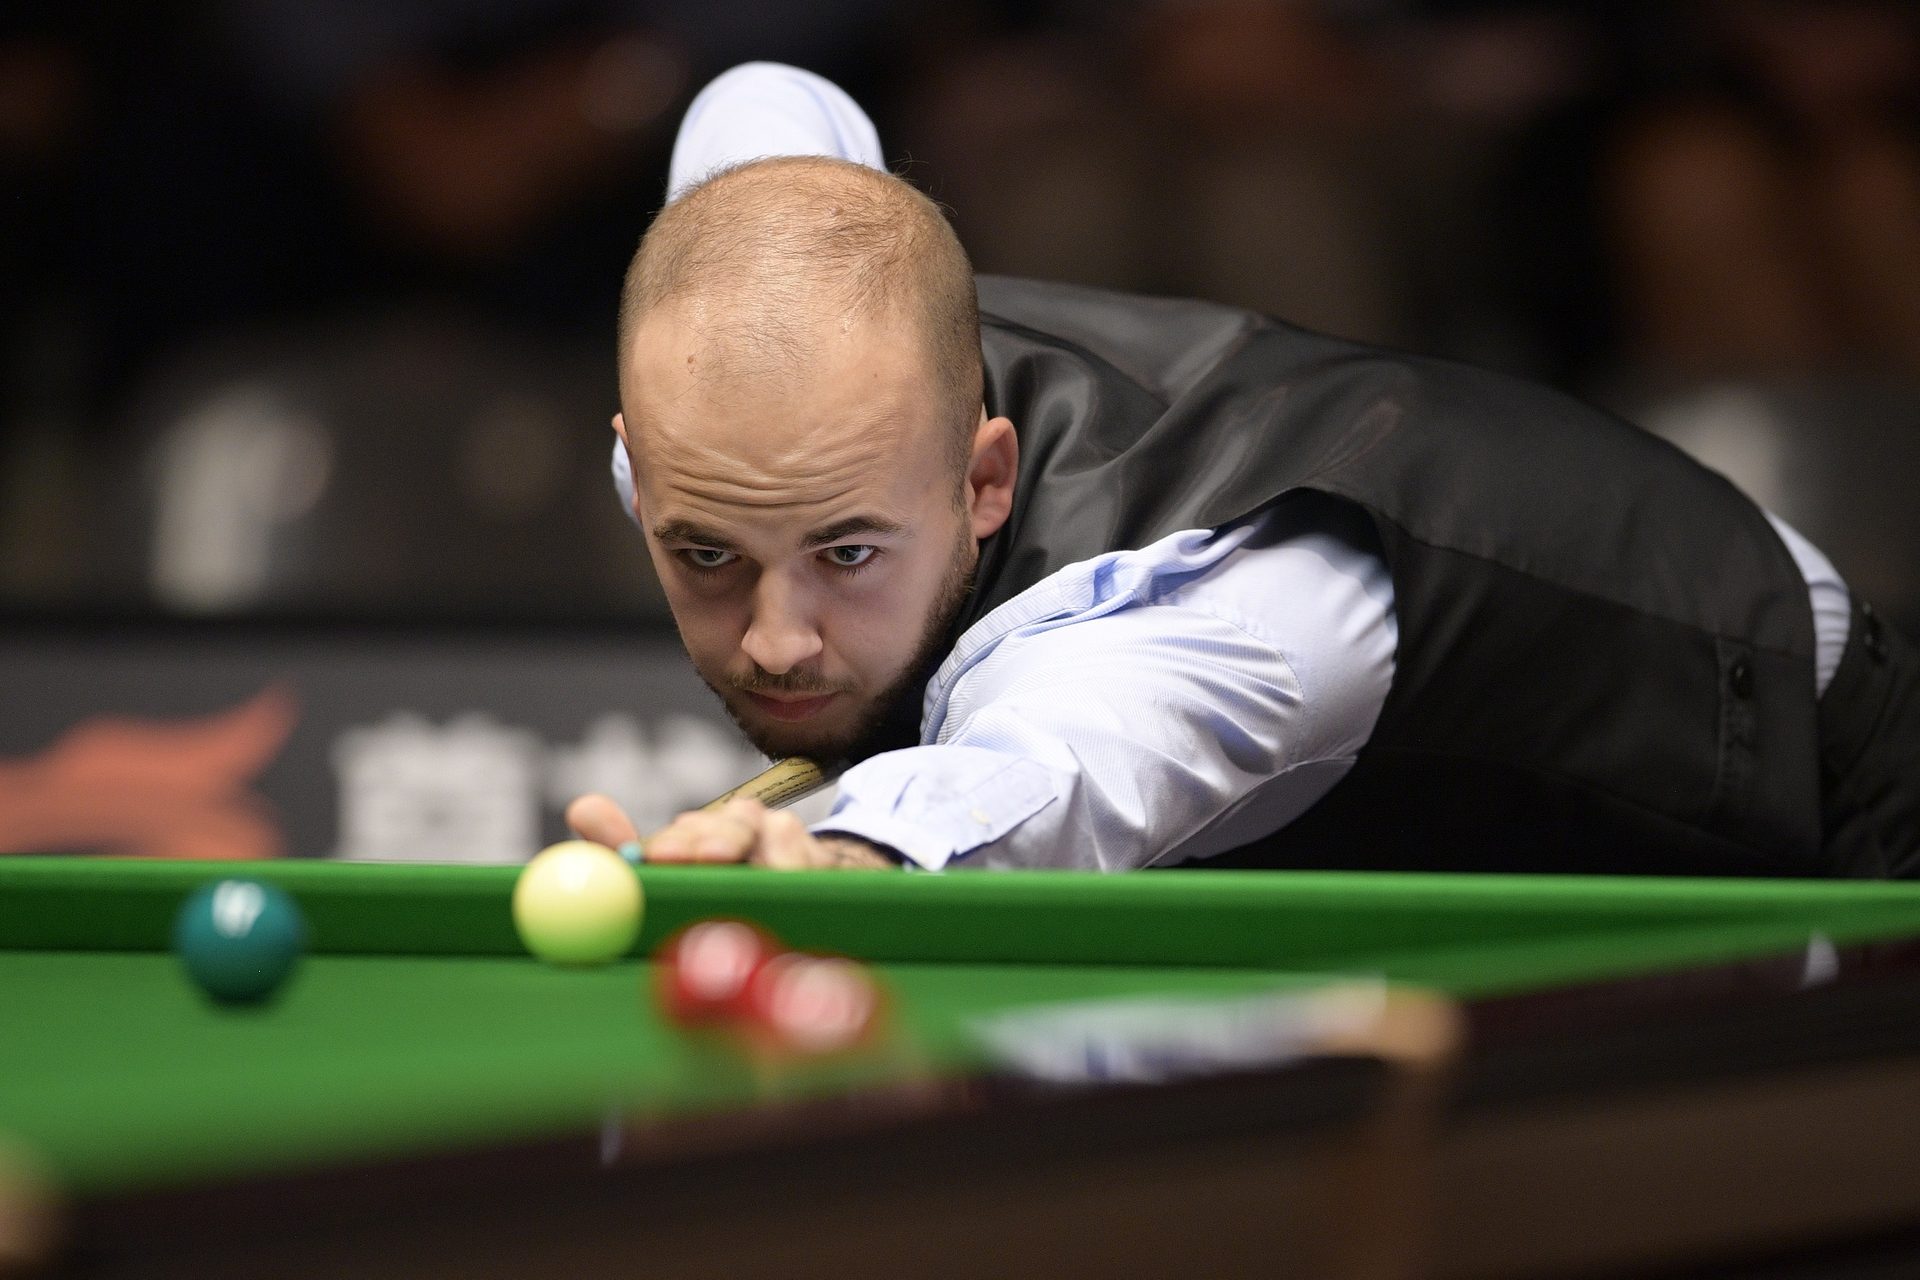 How Snooker Luca shook up the books